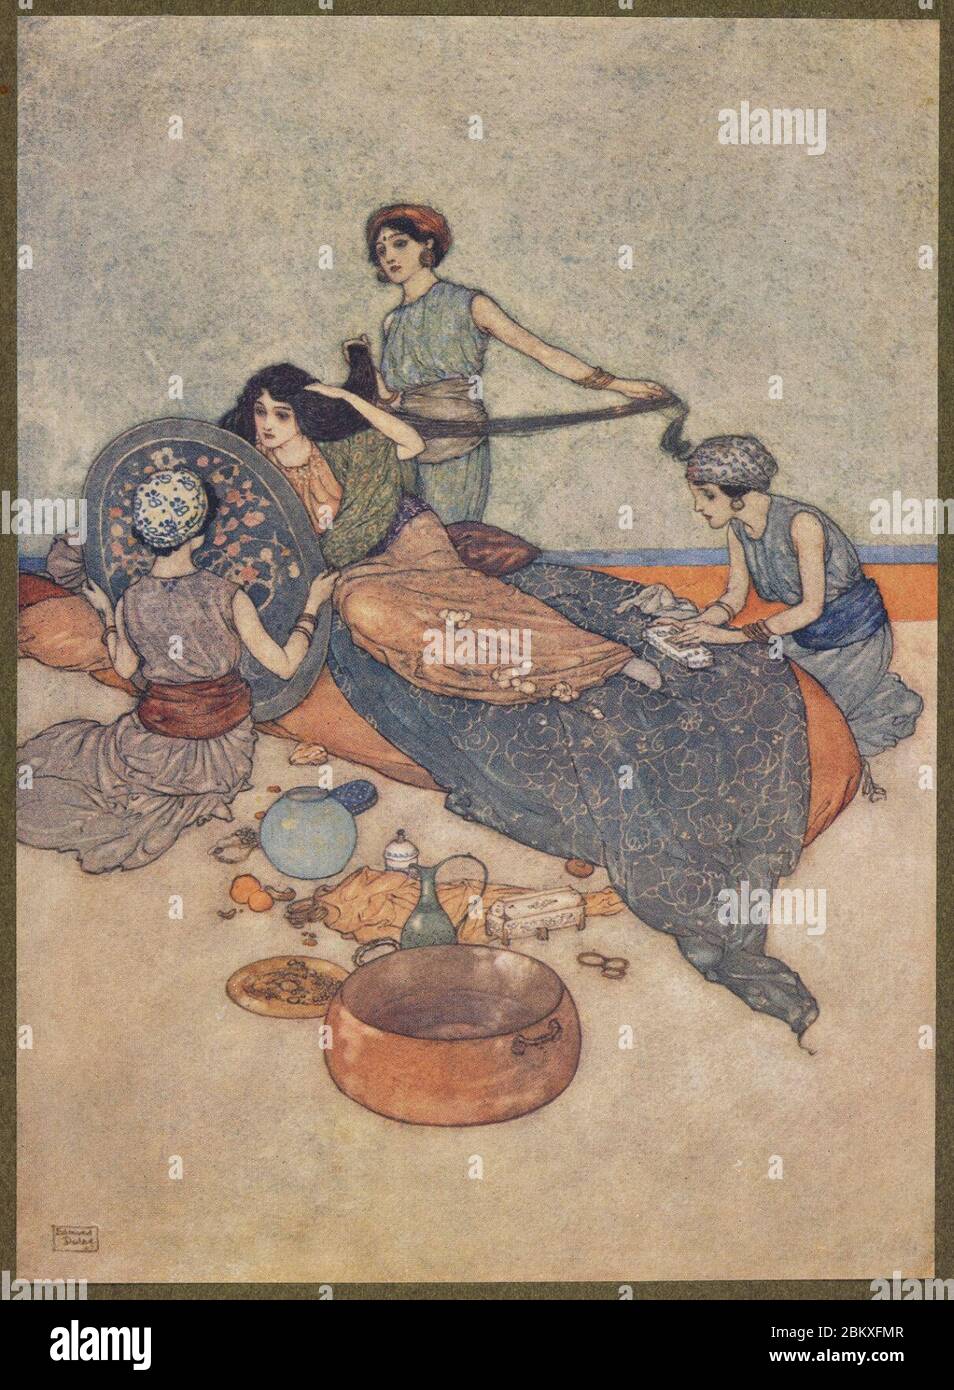 Illustration by Edmund Dulac from One Thousand and One Nights 16. Stock Photo